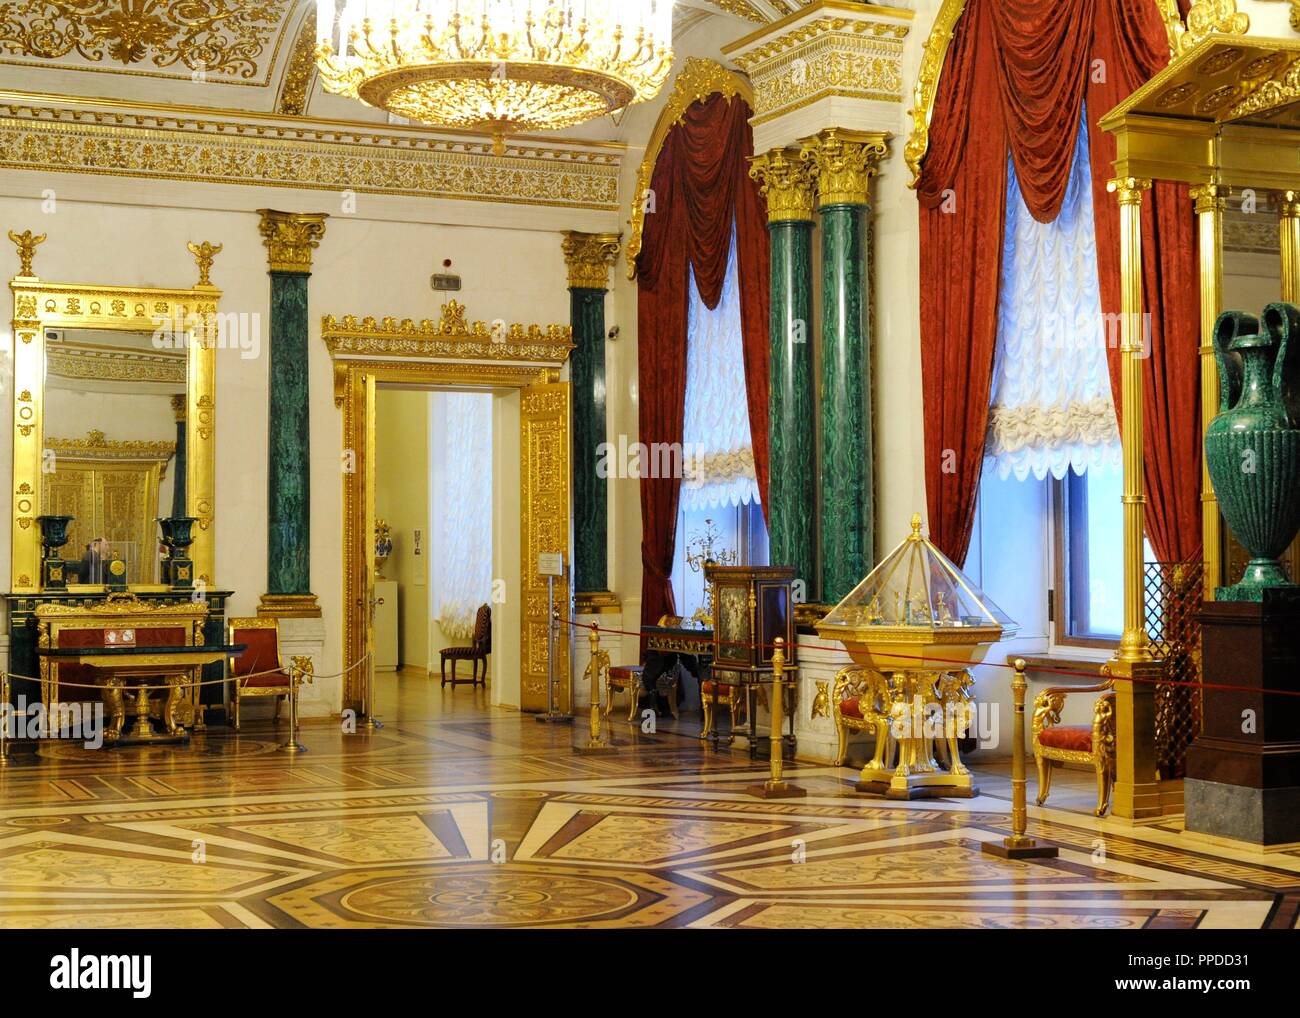 The State Hermitage Museum. Winter Palace. The malachite room. By Alexander Briullov, 1839. Saint Petersburg. Russia. Stock Photo